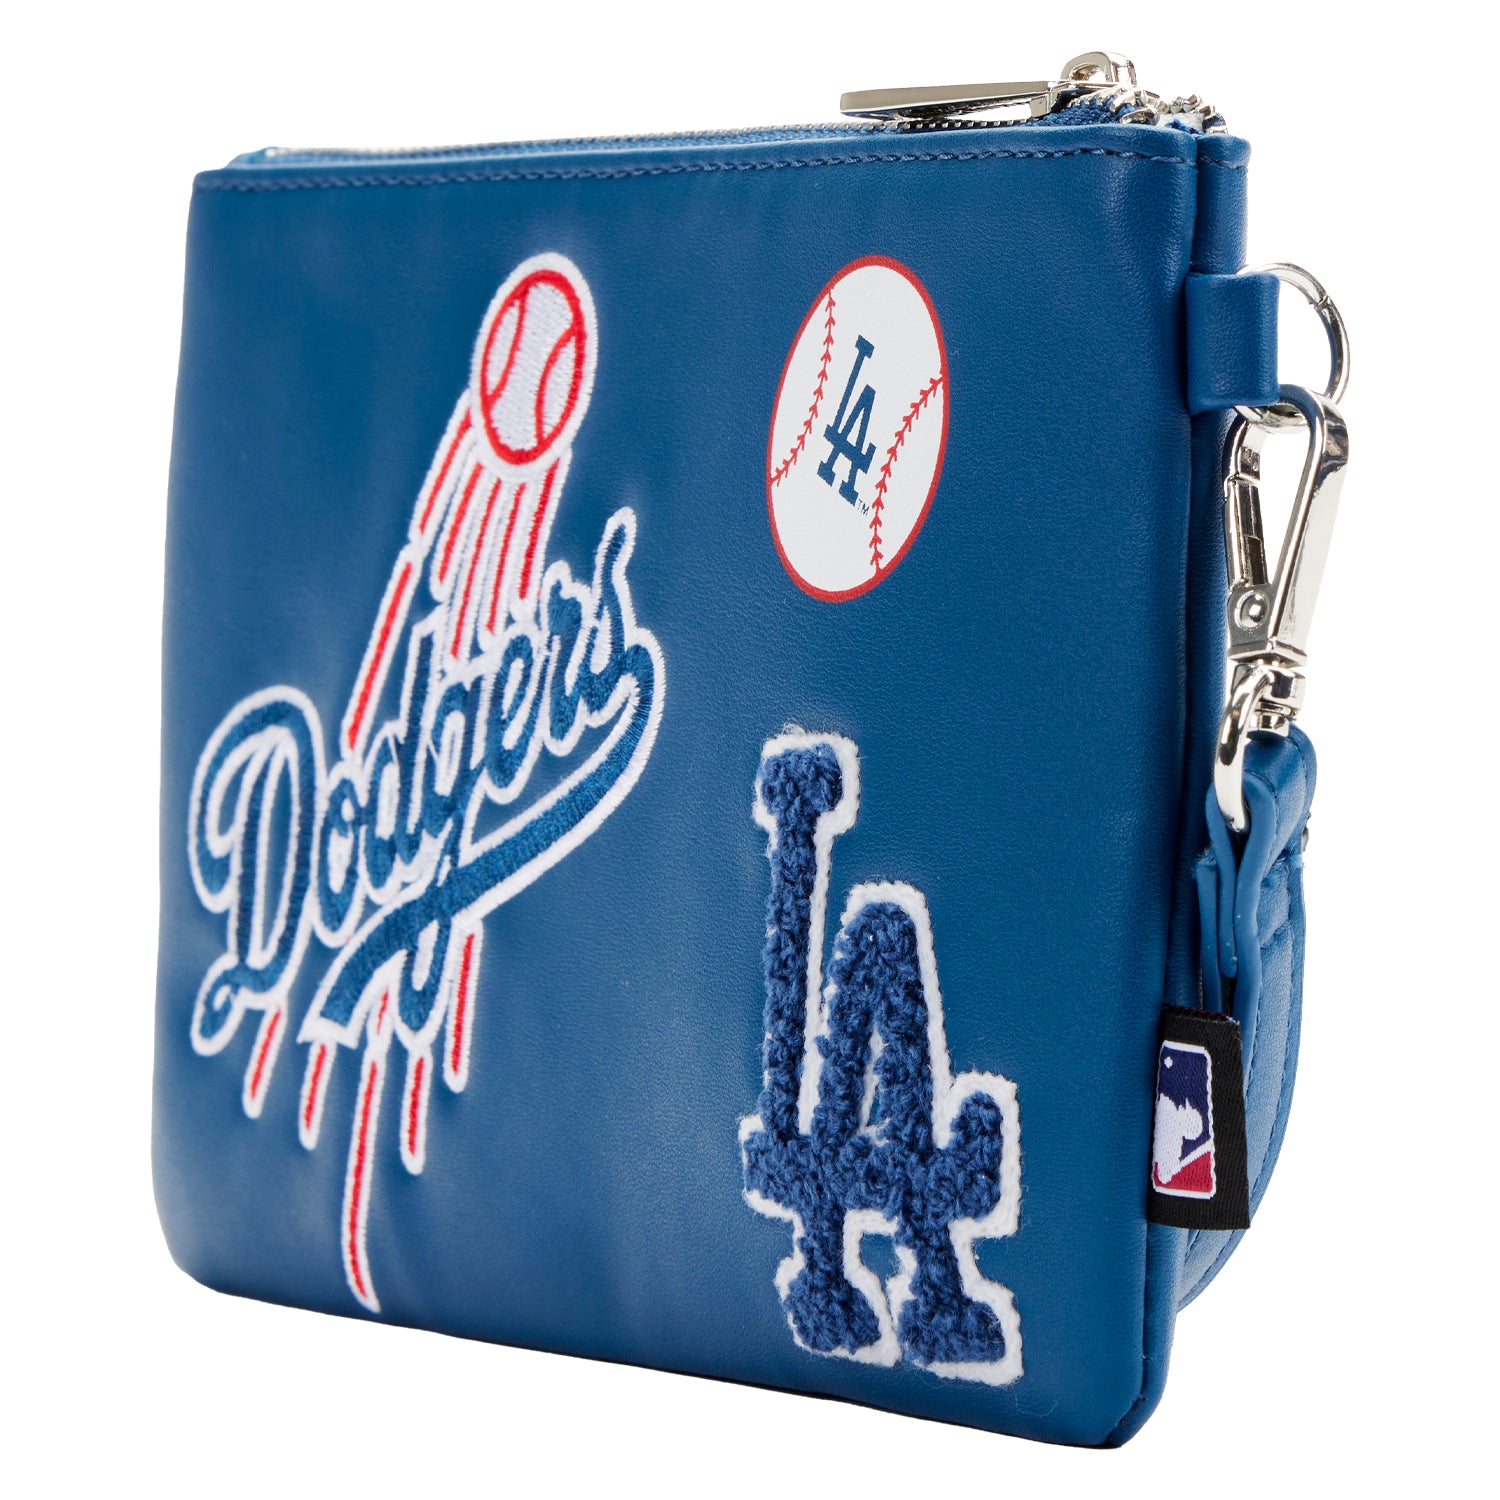 LA Dodgers Crossbody Bag  Stadium Approved for Sale in San Diego, CA -  OfferUp